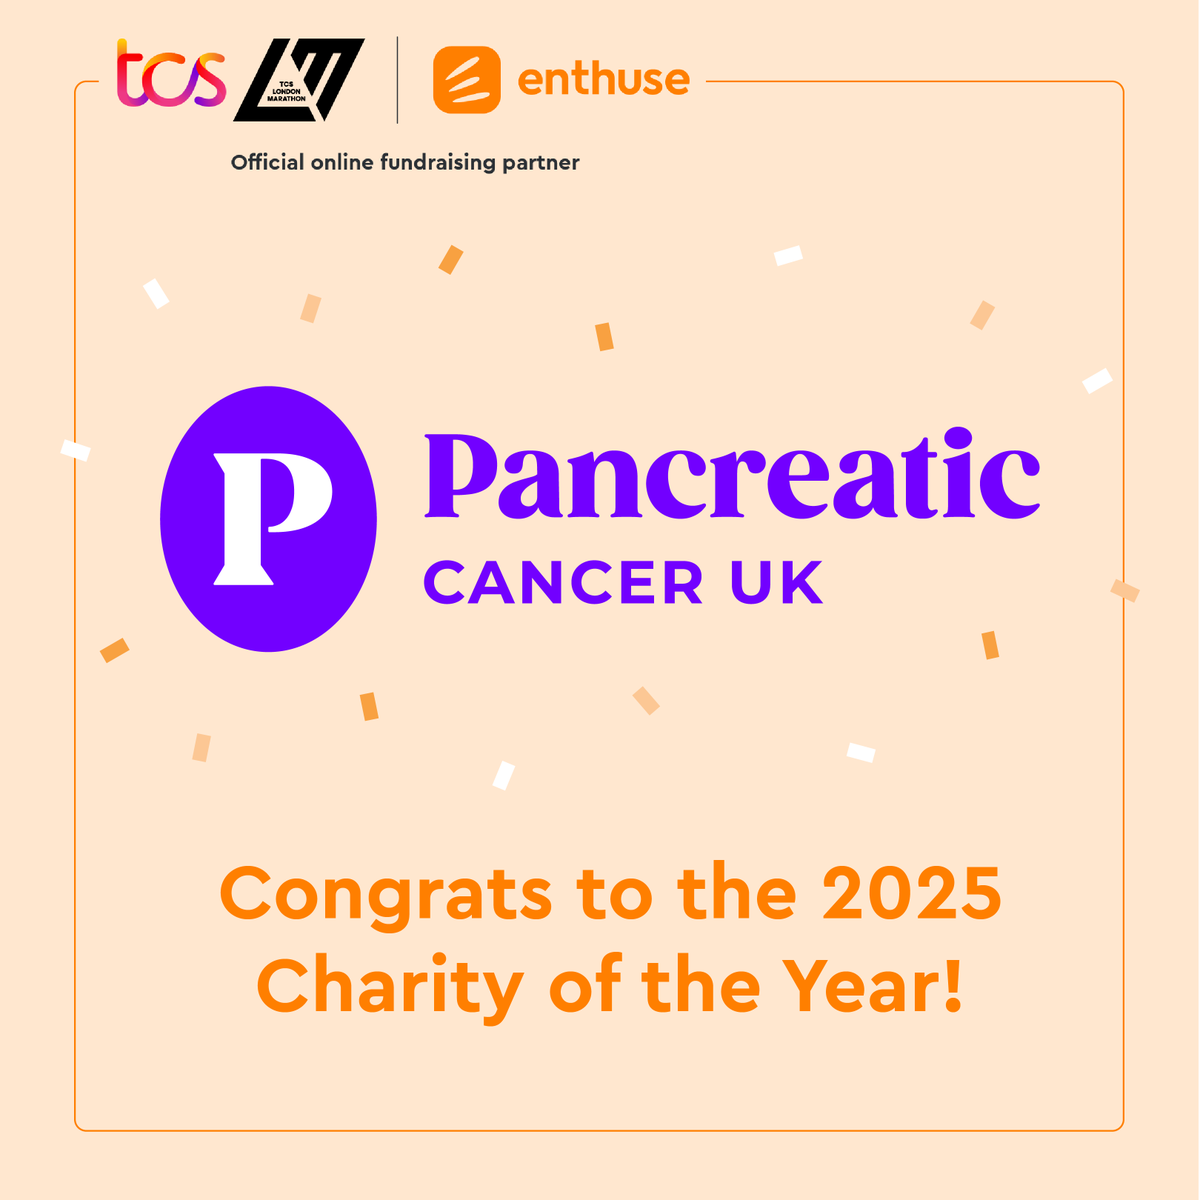 Congratulations to @PancreaticCanUK on being named the 2025 TCS @LondonMarathon Charity of the Year! A brilliant achievement. We look forward to working together to help raise as much as possible for your fantastic cause. #LondonMarathon2025